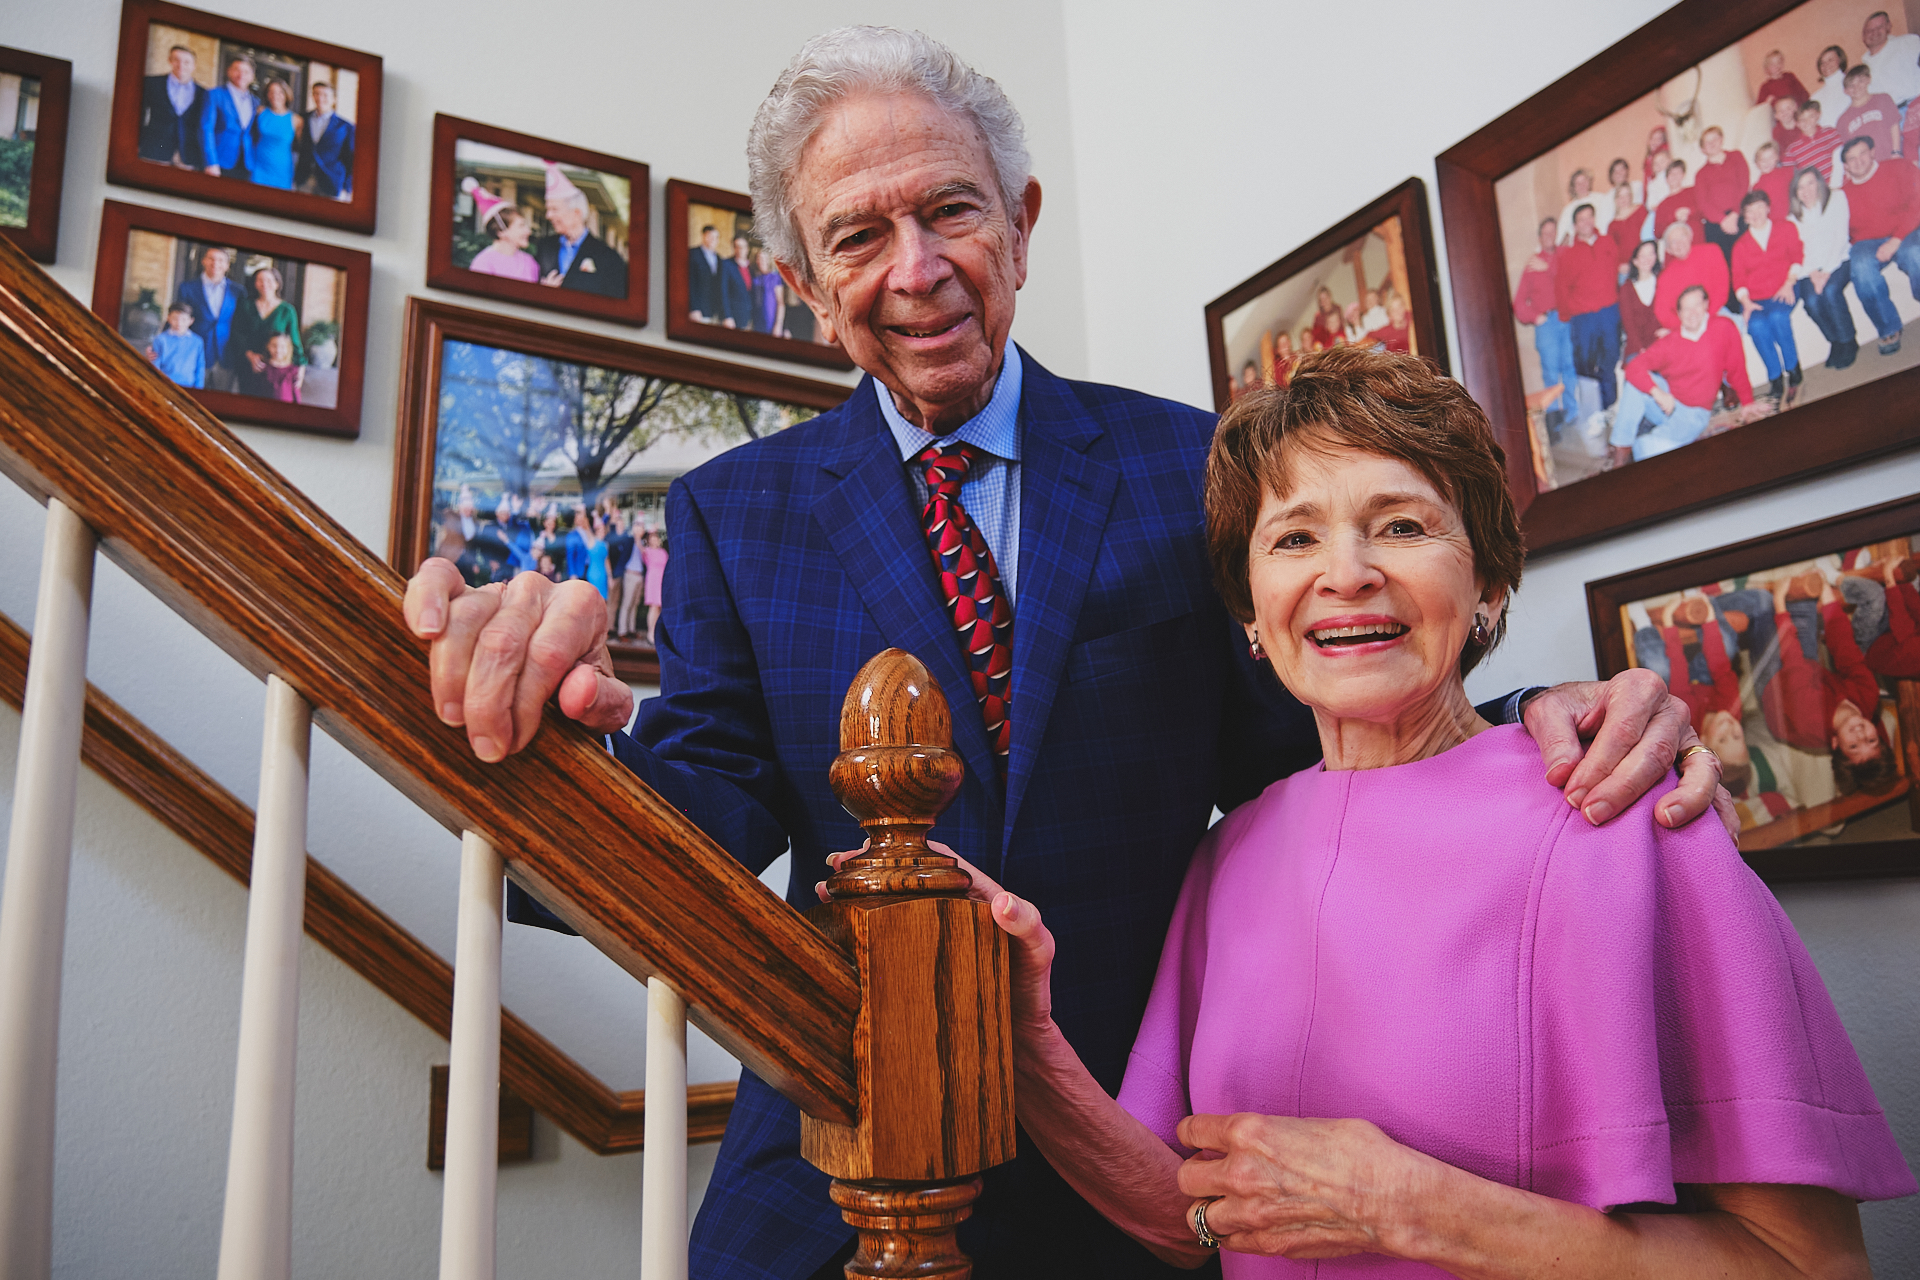 Mary Stewart and Jim Ramsey photographed surrounded by family photos. Their family and community inspired them to support the elderly populations through a donation towards palliative care.